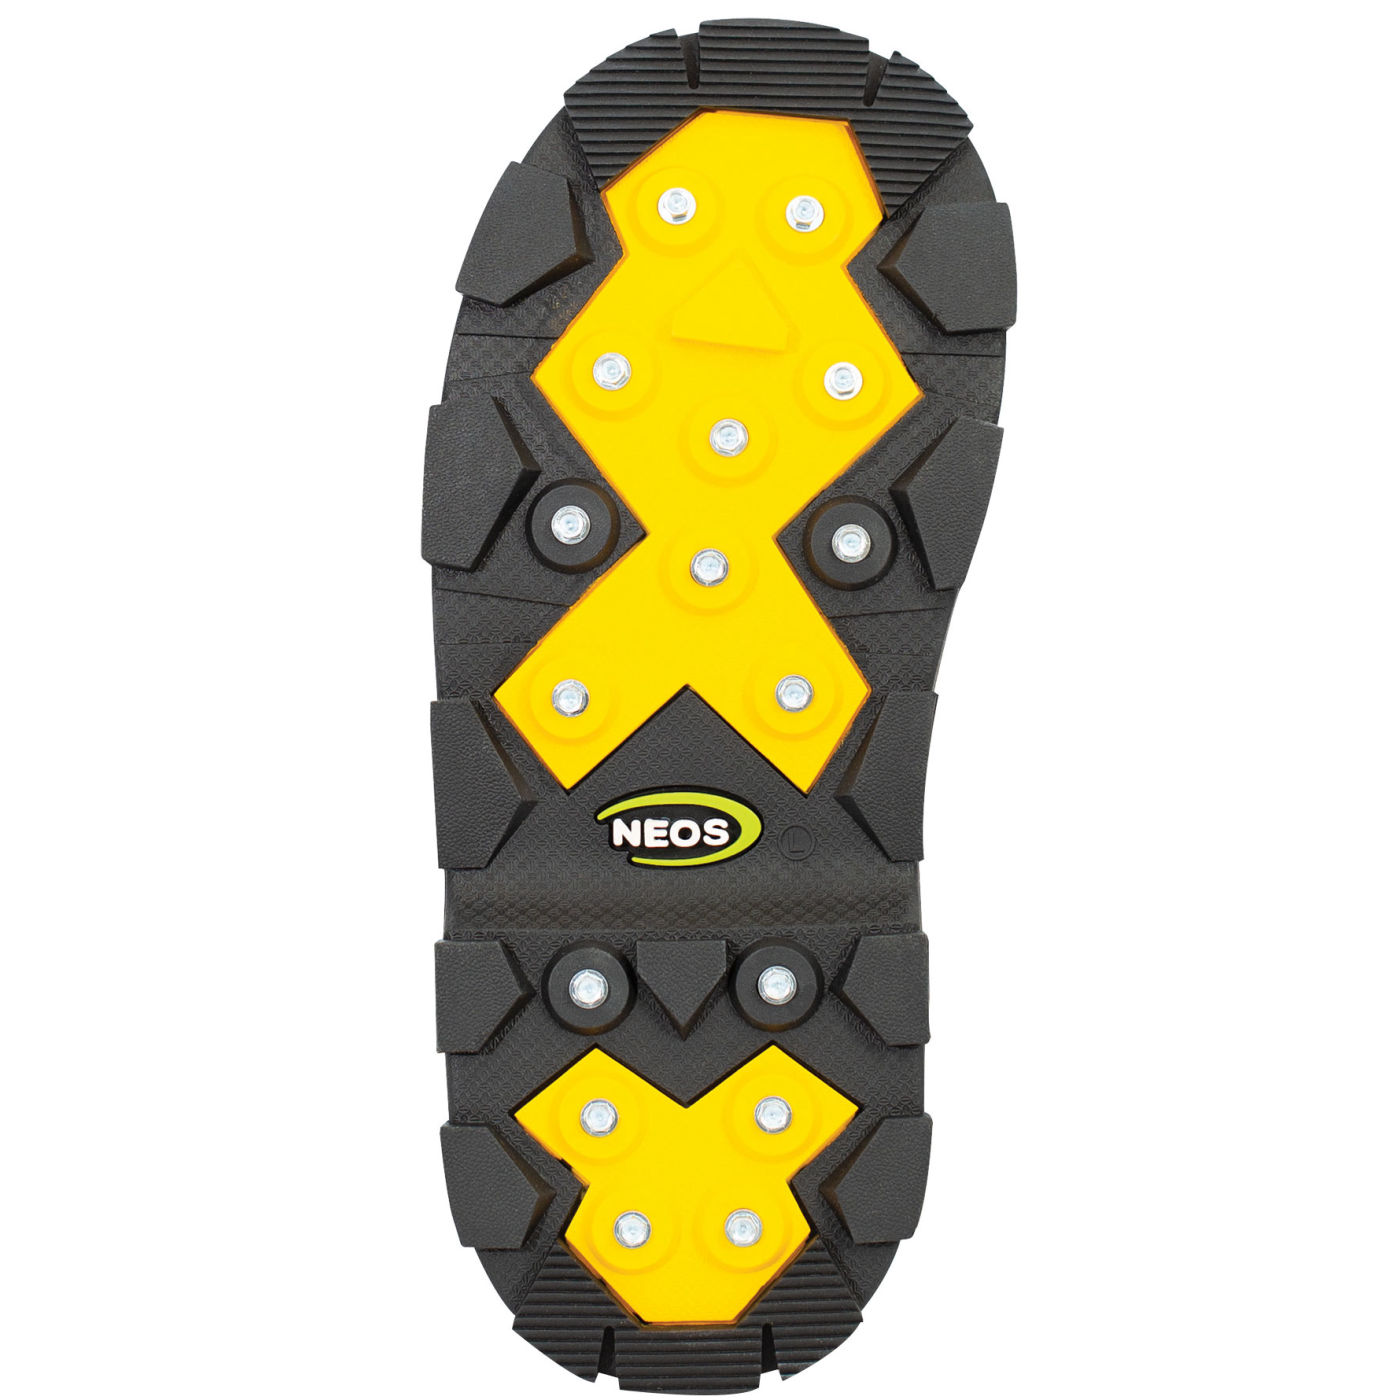 Neos Voyager Overshoe with Heel + Glacier Trek SPK Cleats from GME Supply